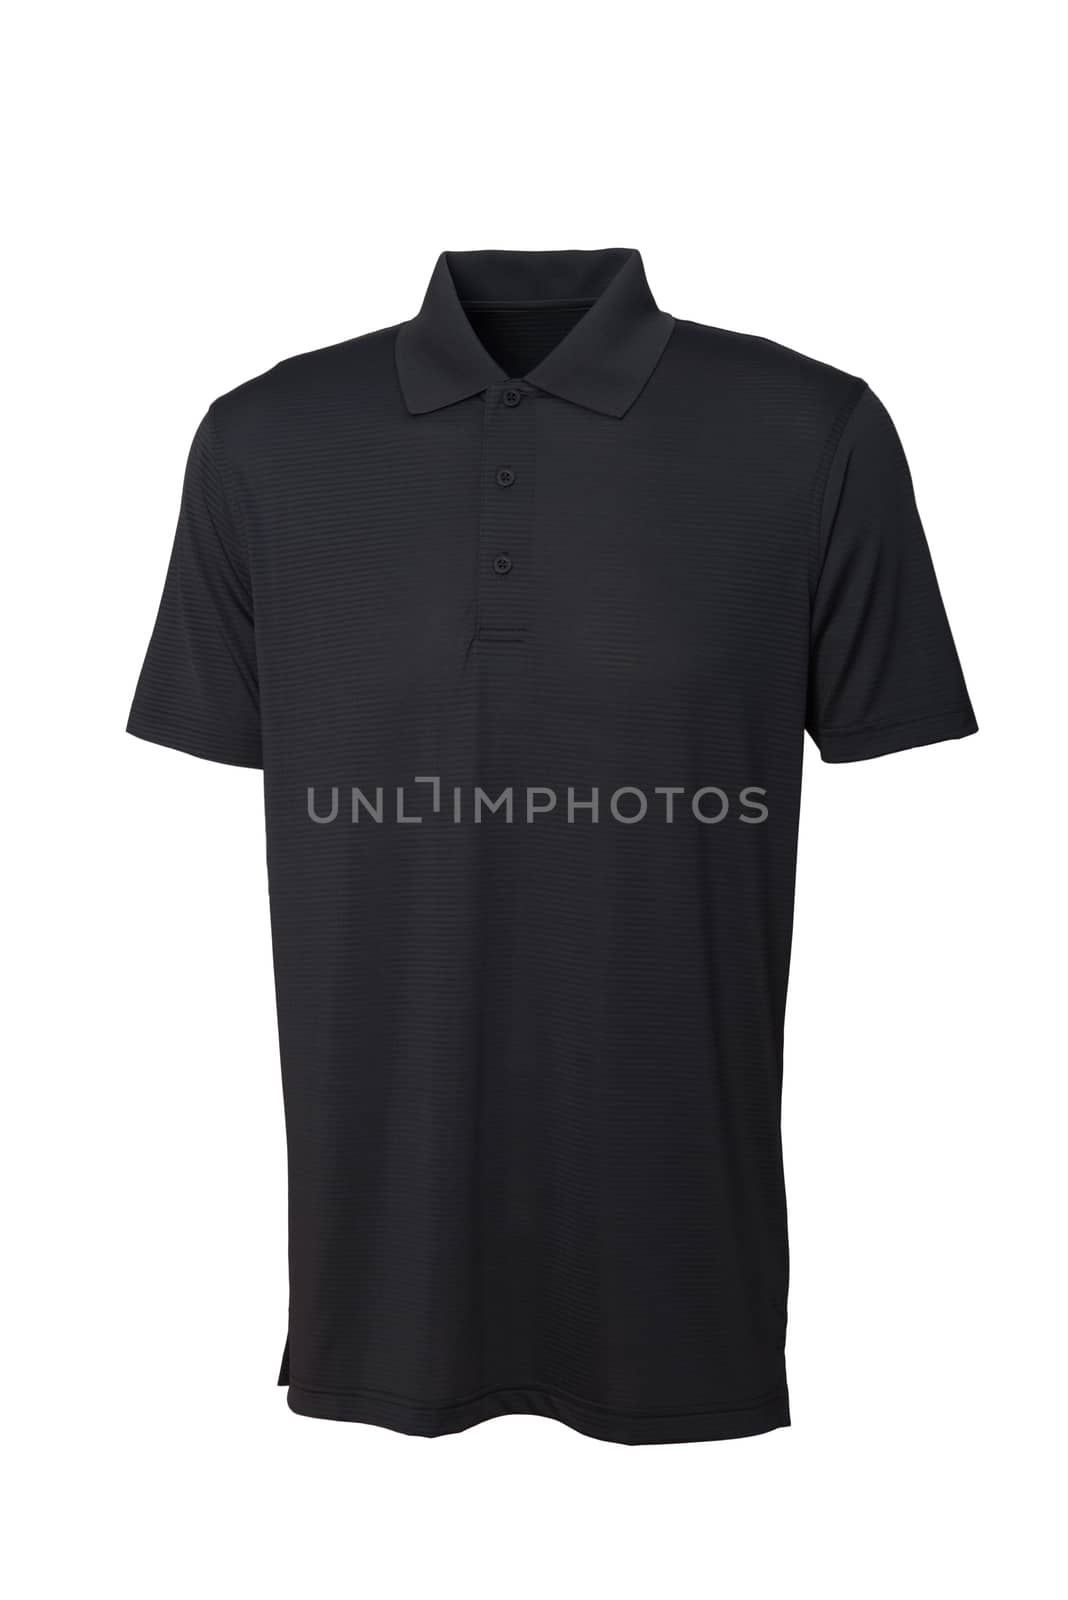 Golf tee shirt black color for man or woman on white background